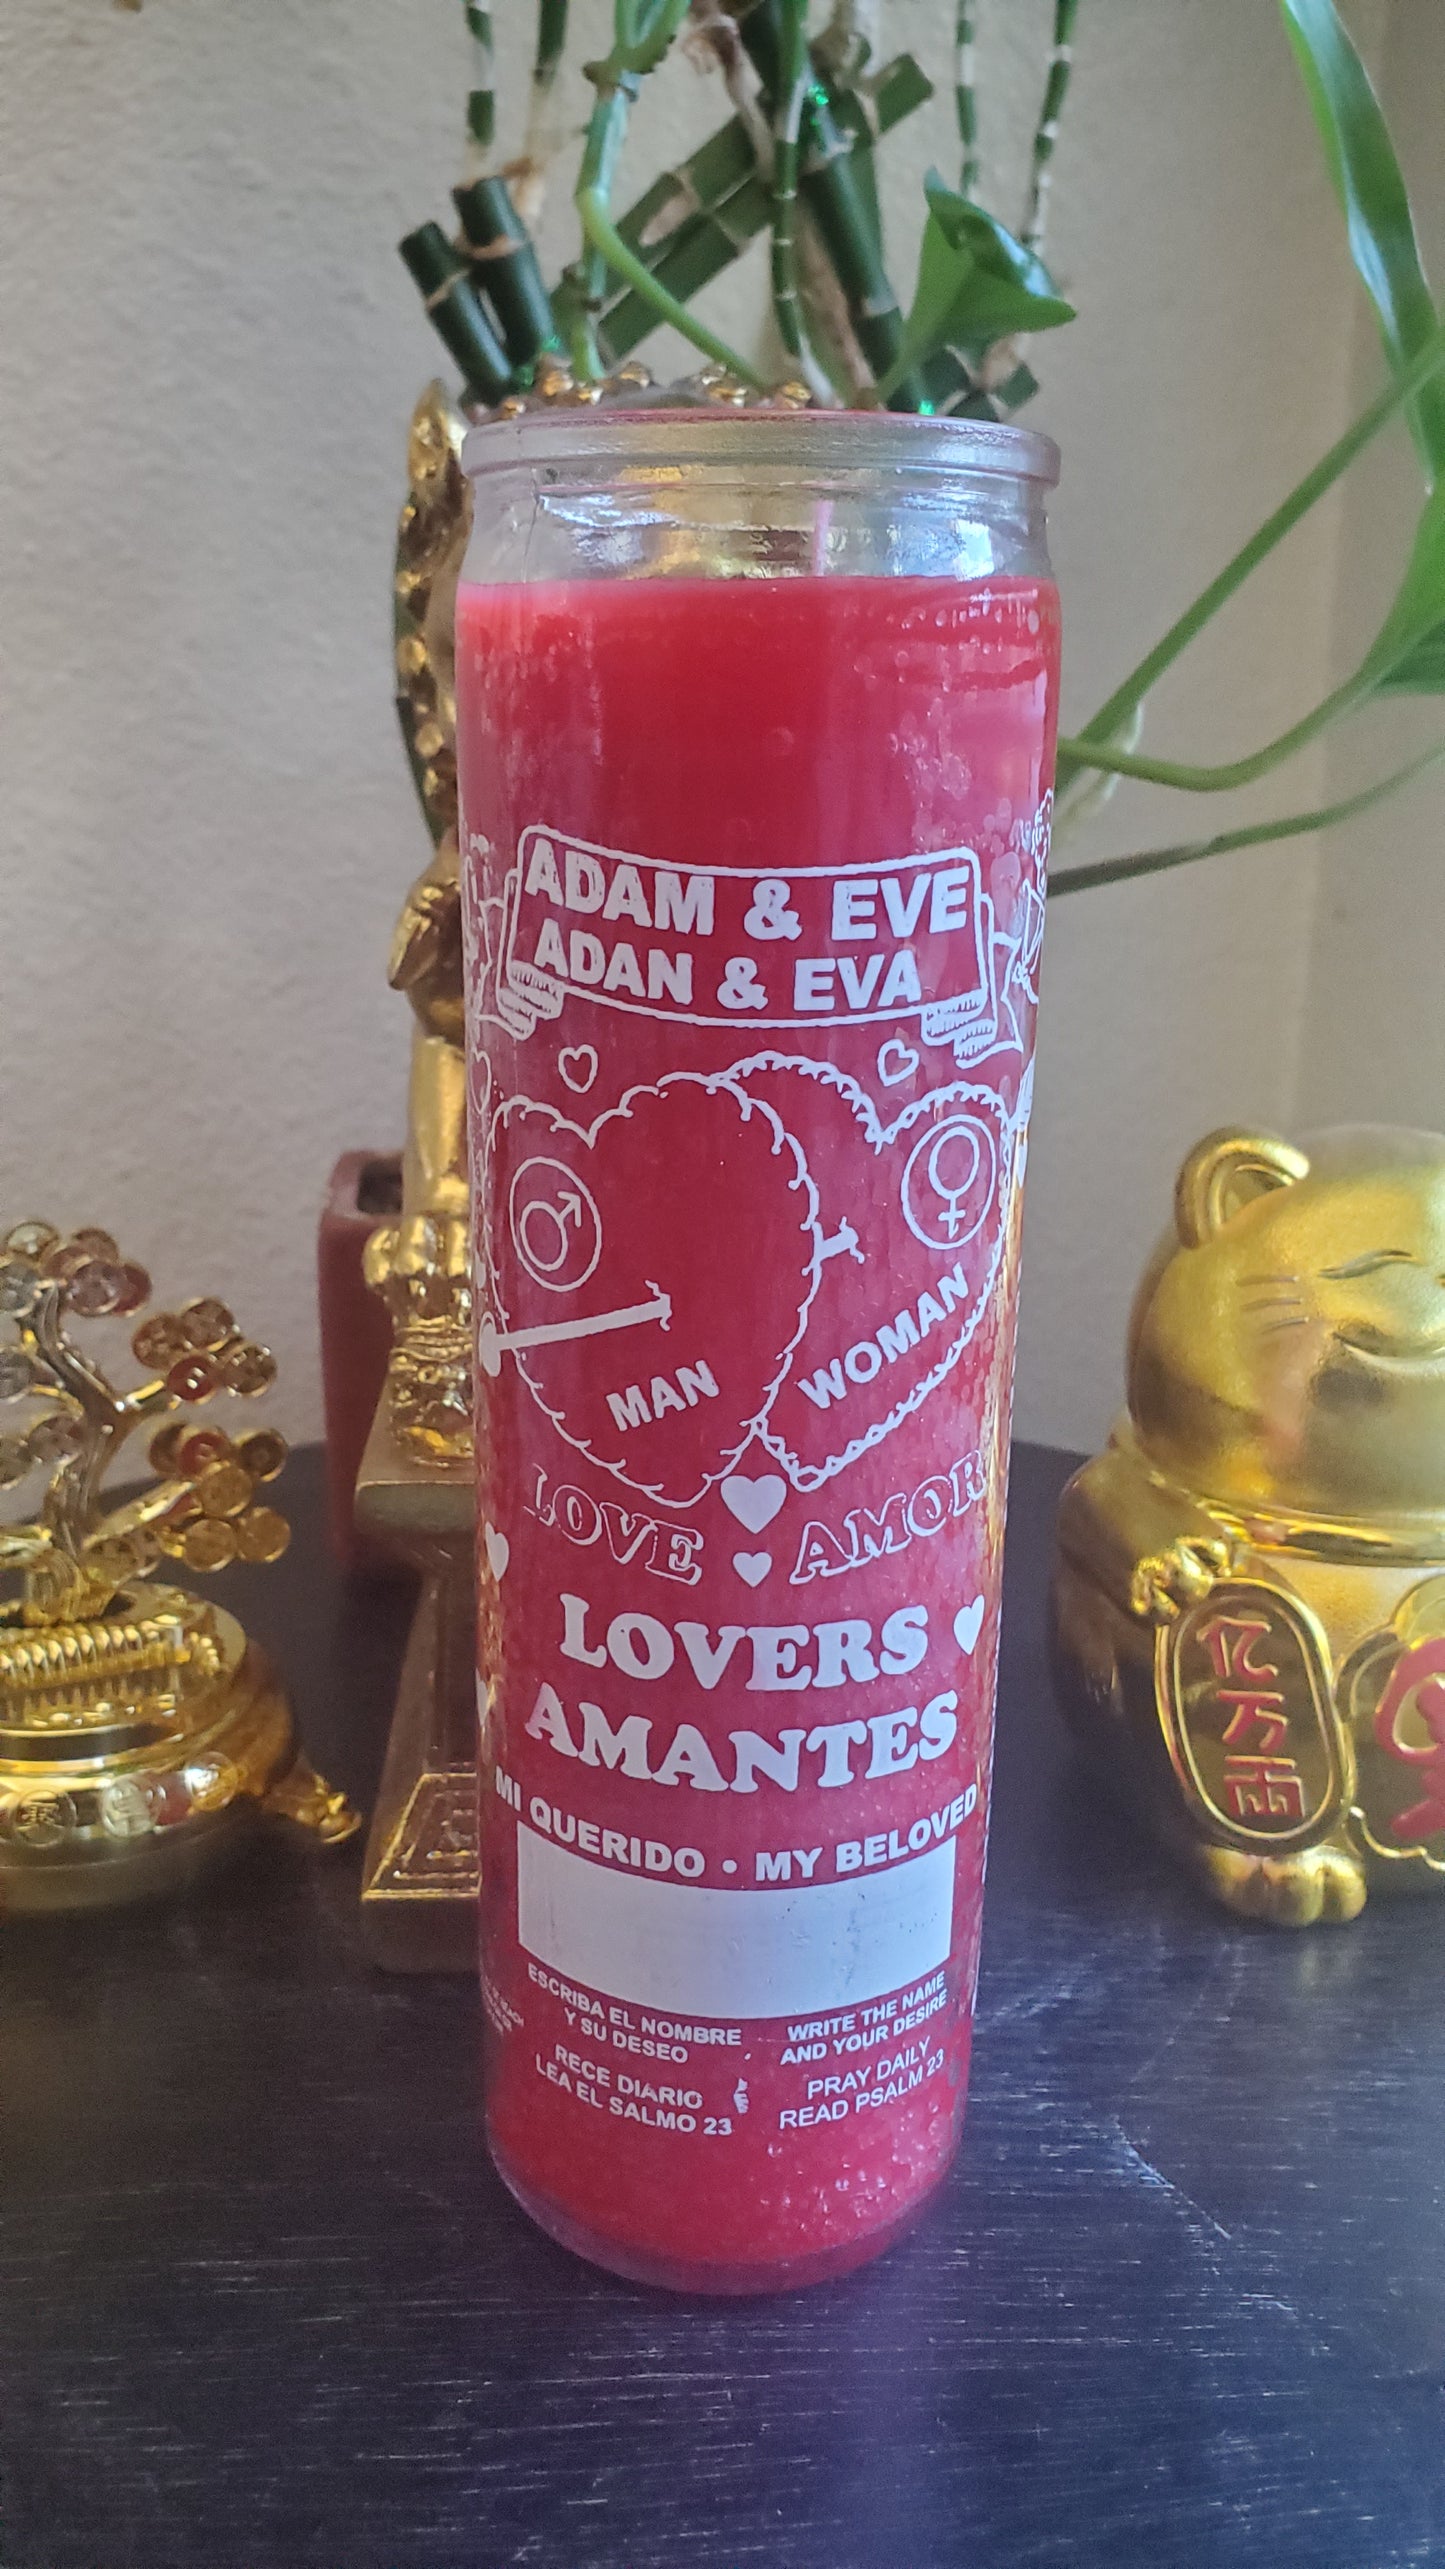 Adam & Eve 7 Day Love Candle** #SpellCandle #RootWork #conjure #LoveMagic #AdamEve #AttractionMagick